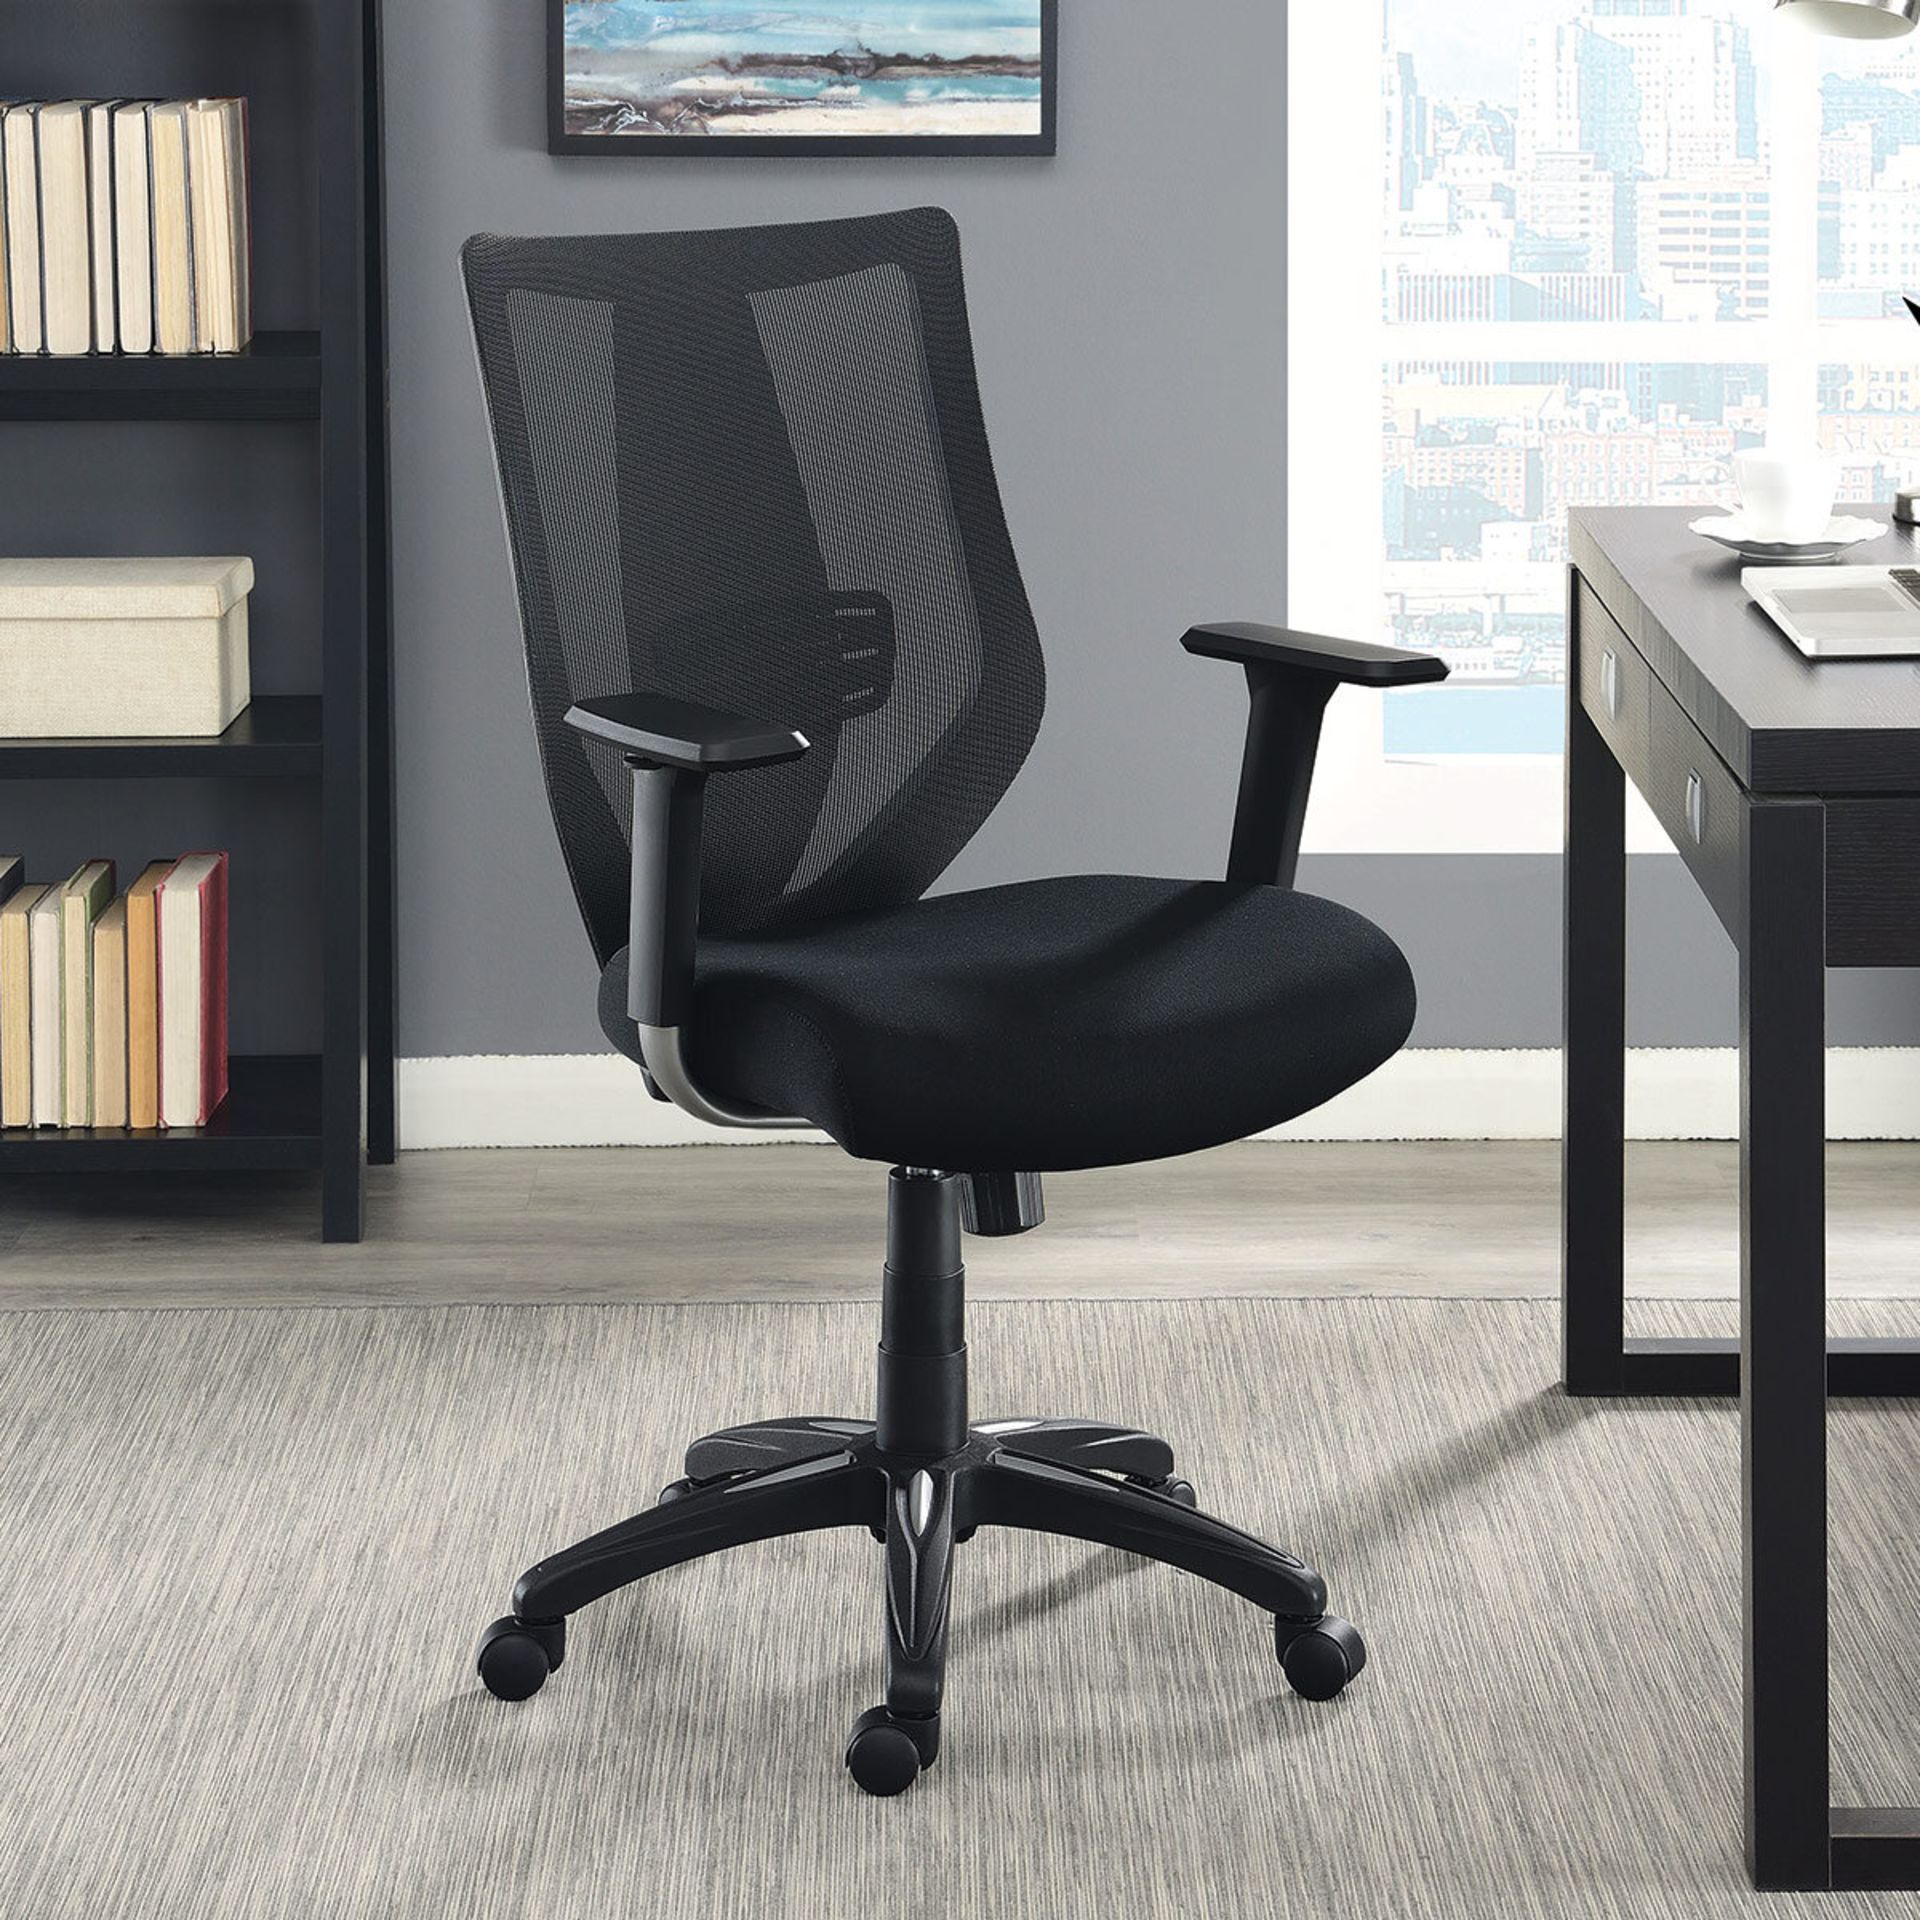 1 TRUE INNOVATIONS MESH OFFICE CHAIR RRP Â£149 (DOESN'T STAY UP, PICTURES FOR ILLUSTRATION